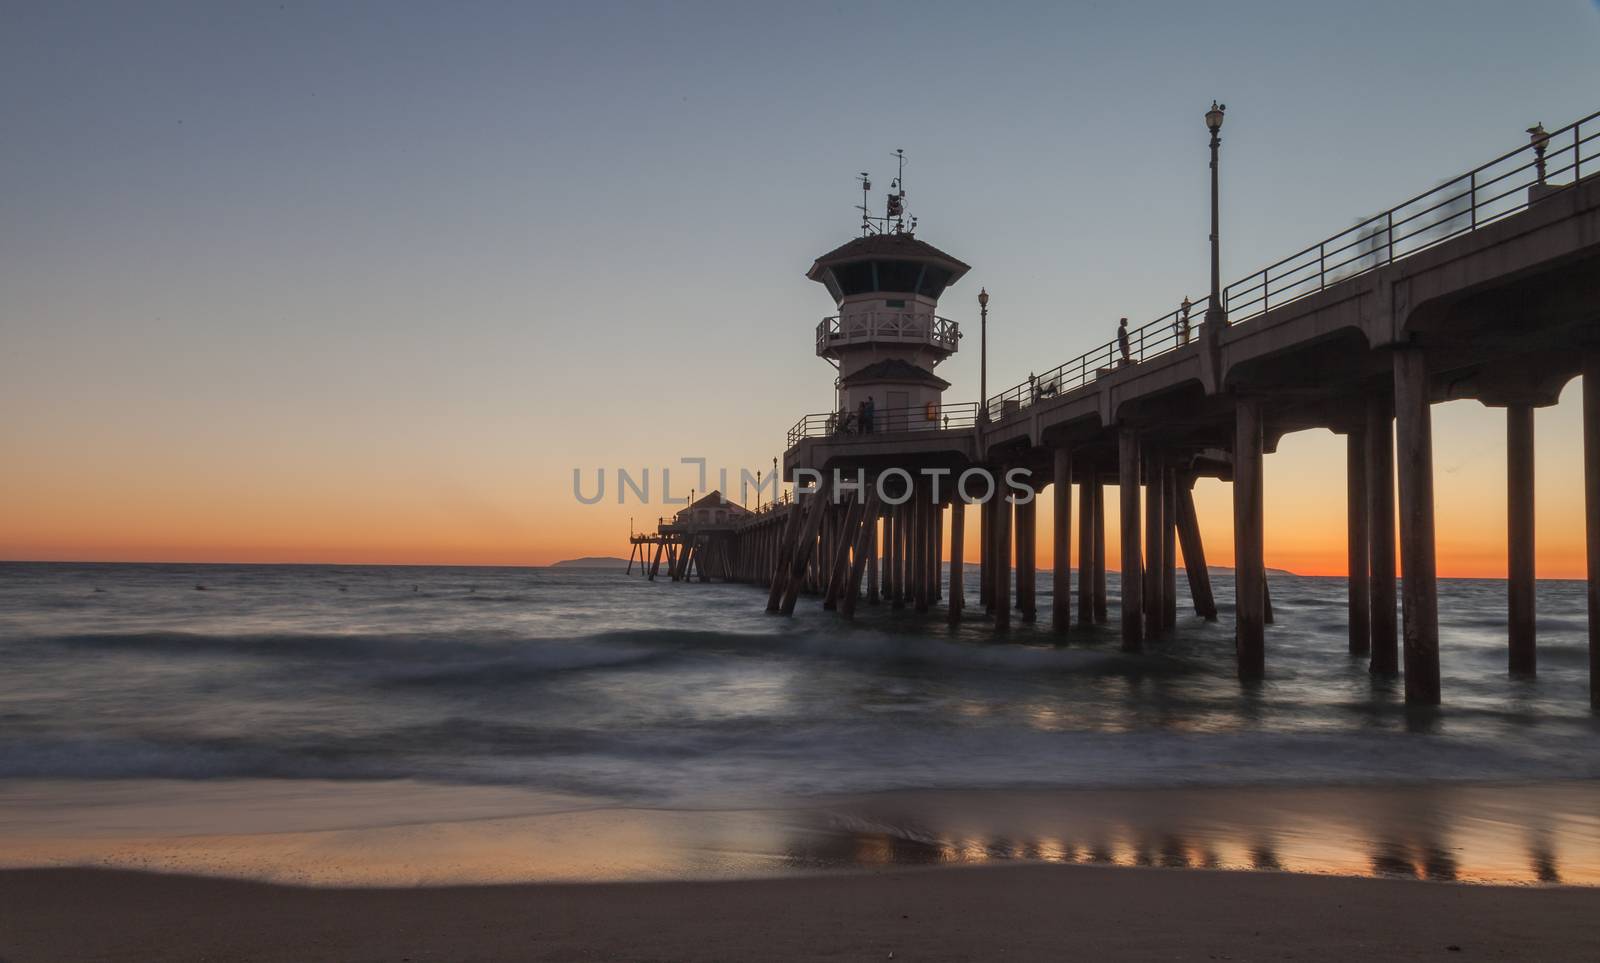 Under the Huntington Beach Pier in Huntington Beach, California, United States at sunset in the fall